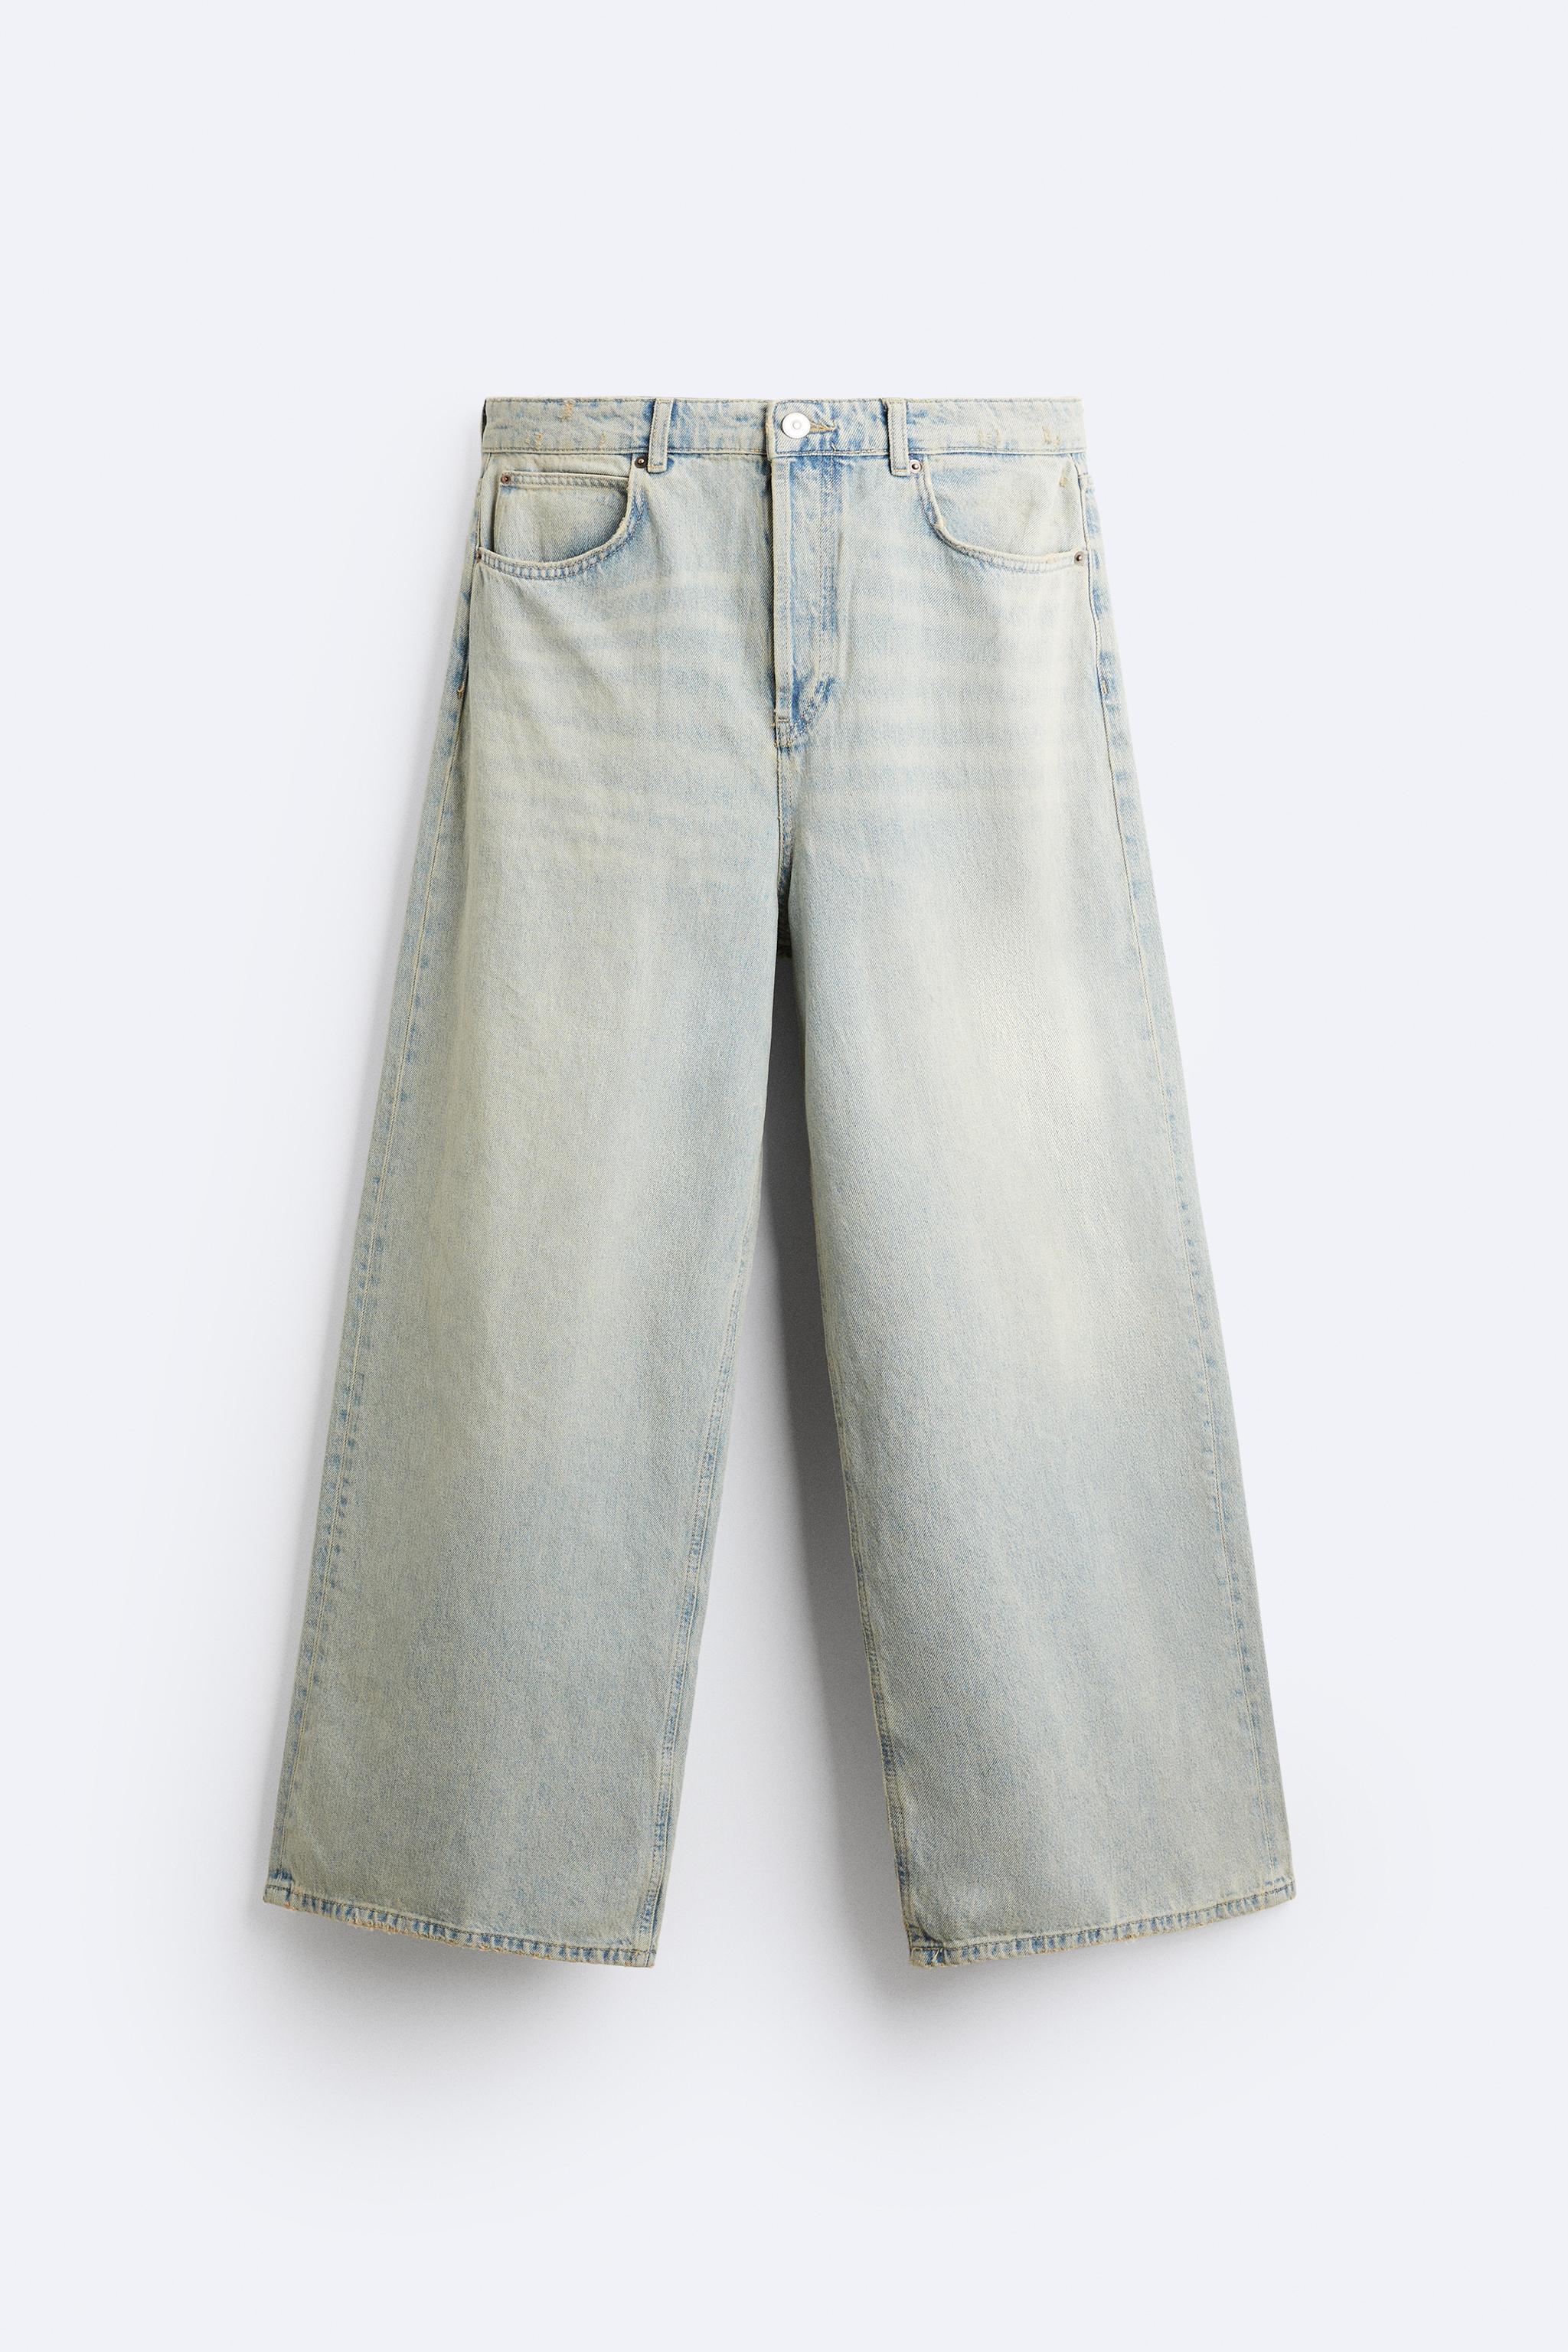 OVERDYED BAGGY JEANS - Sky blue | ZARA United States